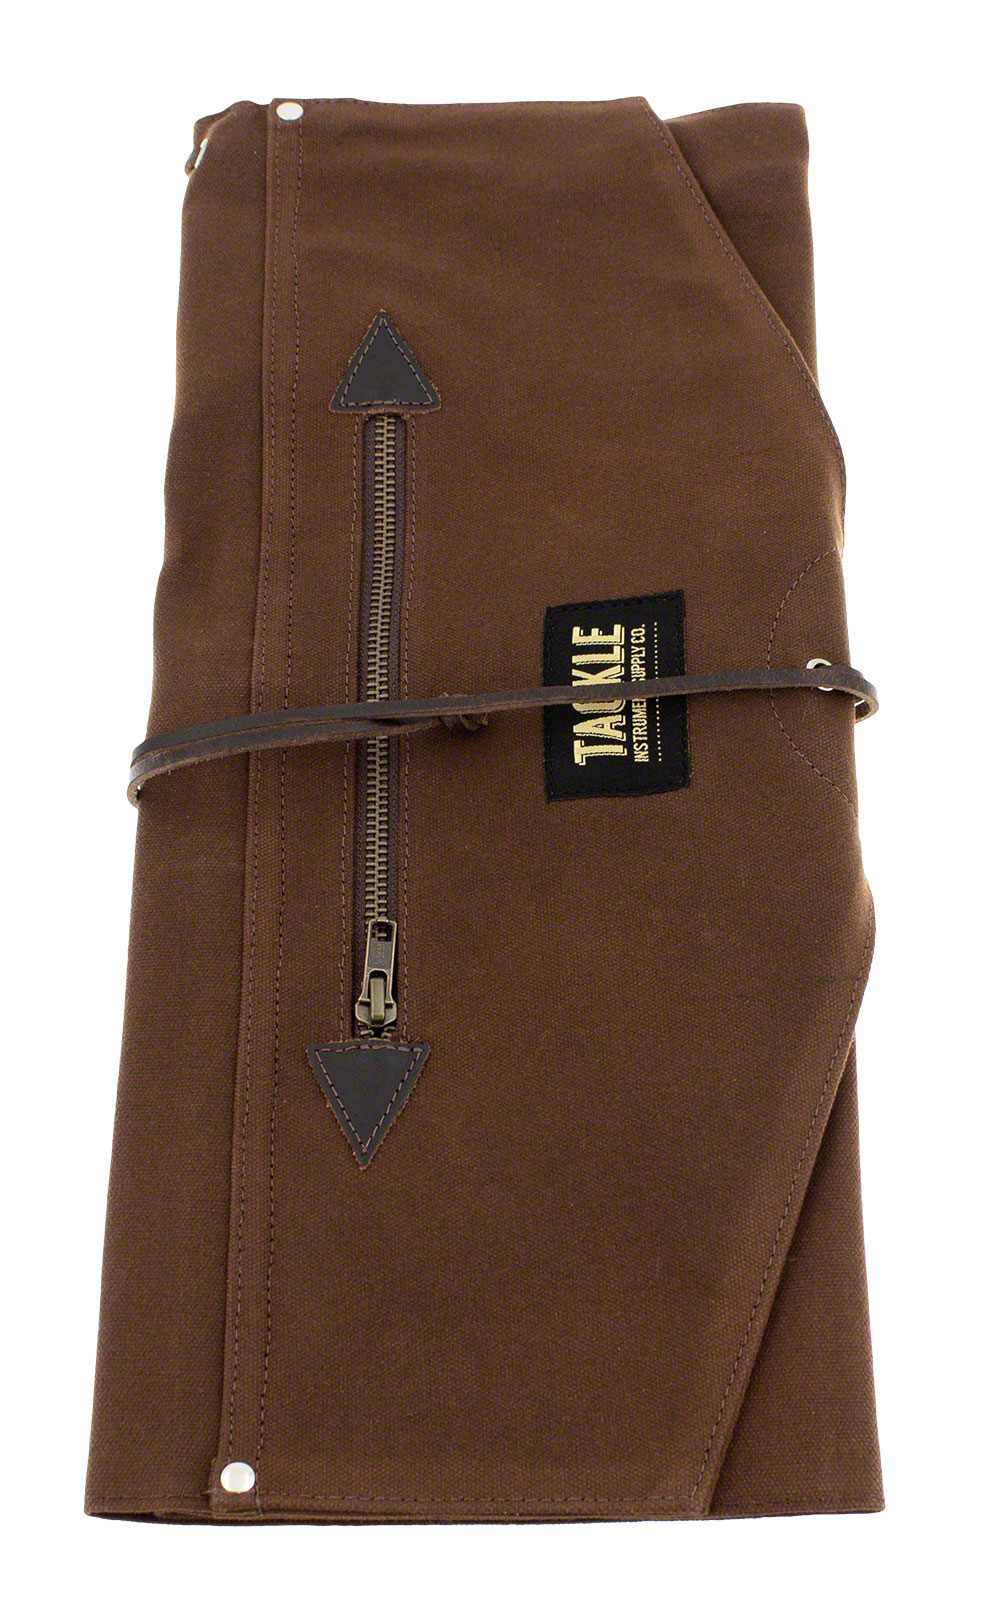 TACKLE INSTRUMENTS WAX CANVAS ROLL-UP STICK CASE - BROWN